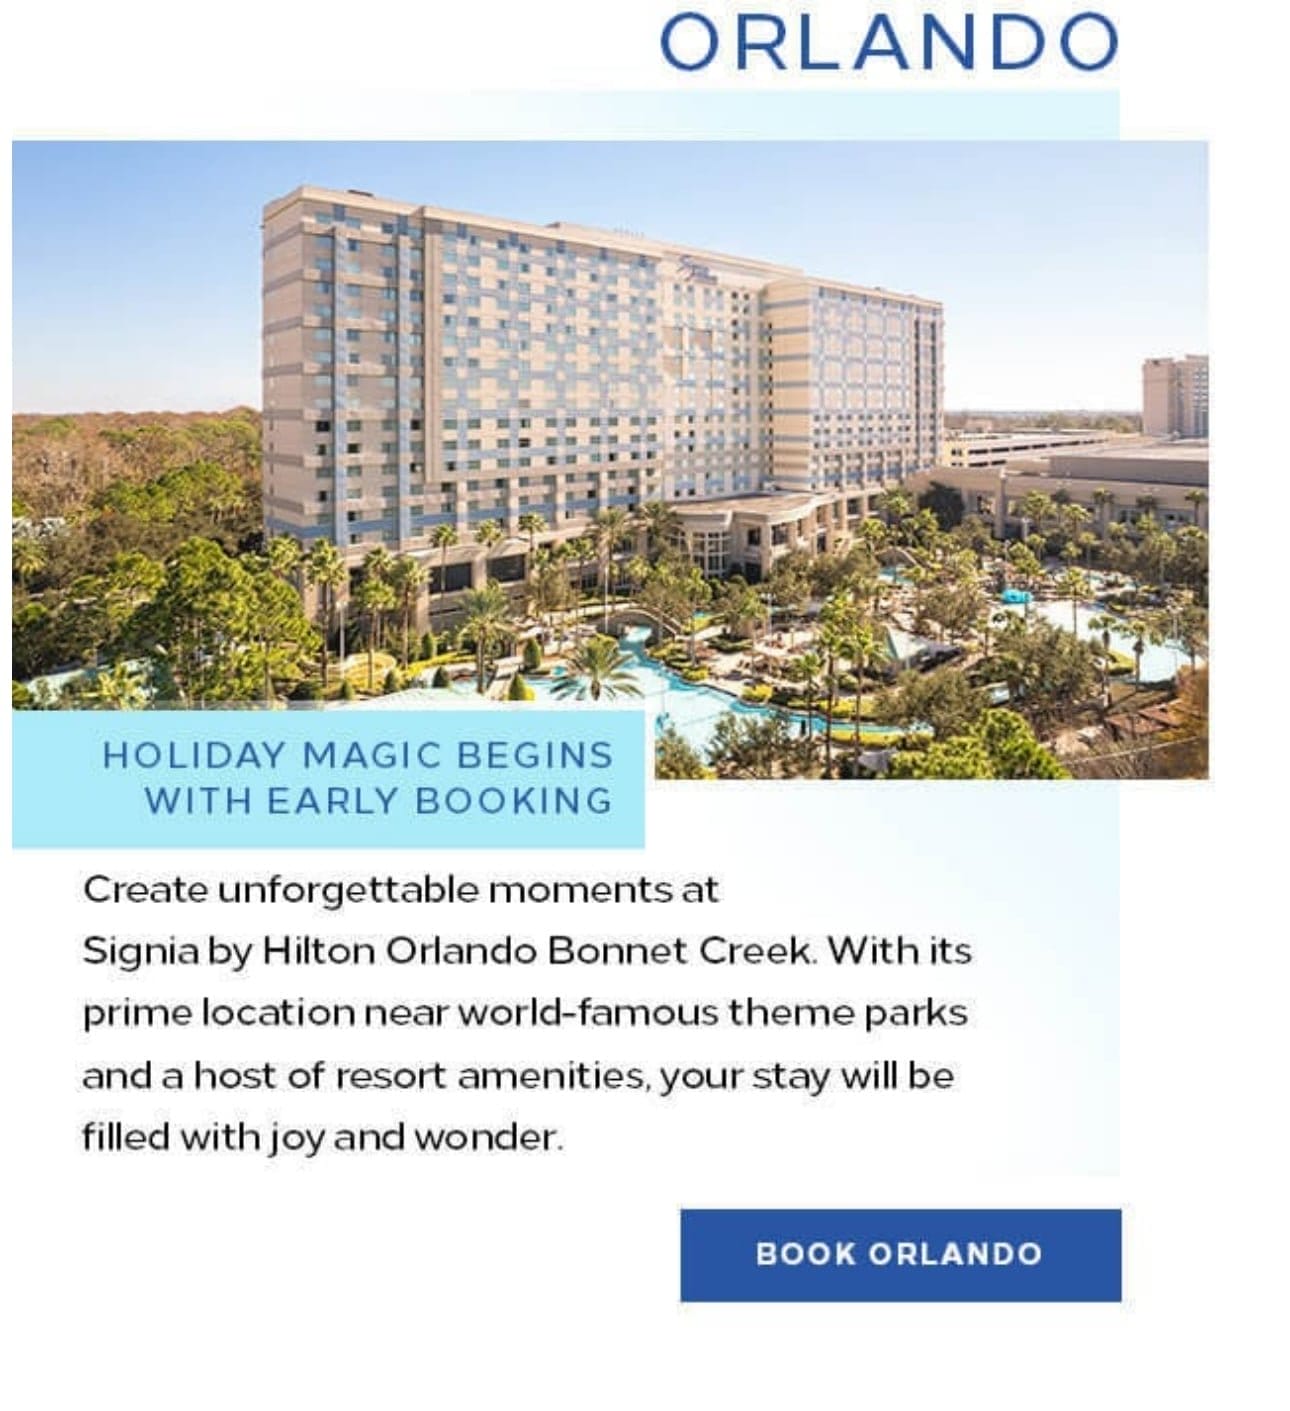  Orlando. Create unforgettable moments at Signia by Hilton Orlando Bonnet Creek. With its prime location near world-famous theme parks and a host of resort amenities, your stay will be filled with joy and wonder. Book Orlando. 